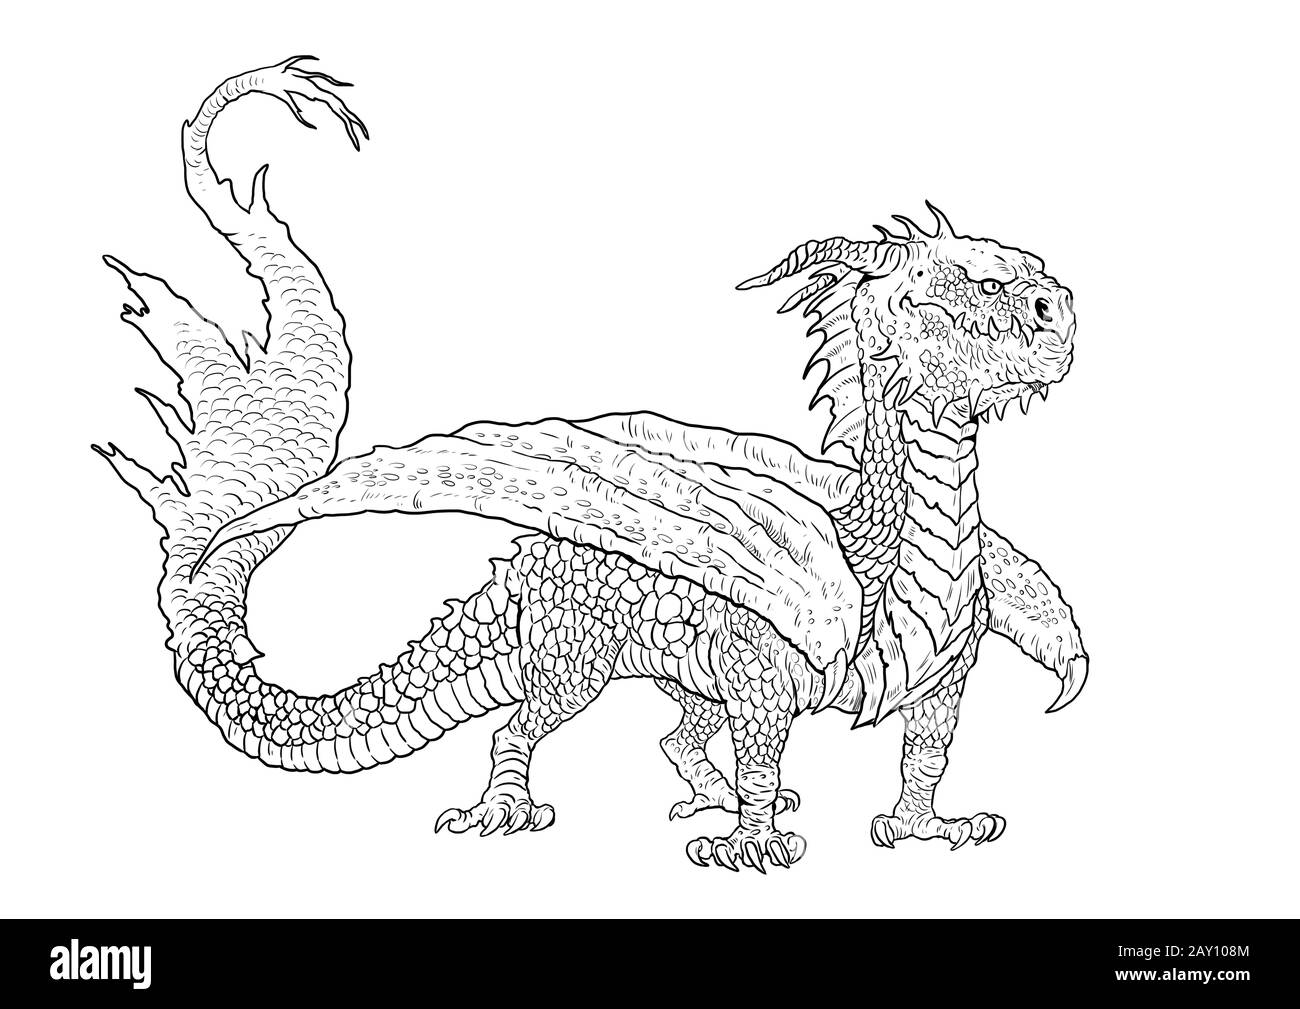 Dragon coloring page outline illustration dragon drawing coloring sheet stock photo